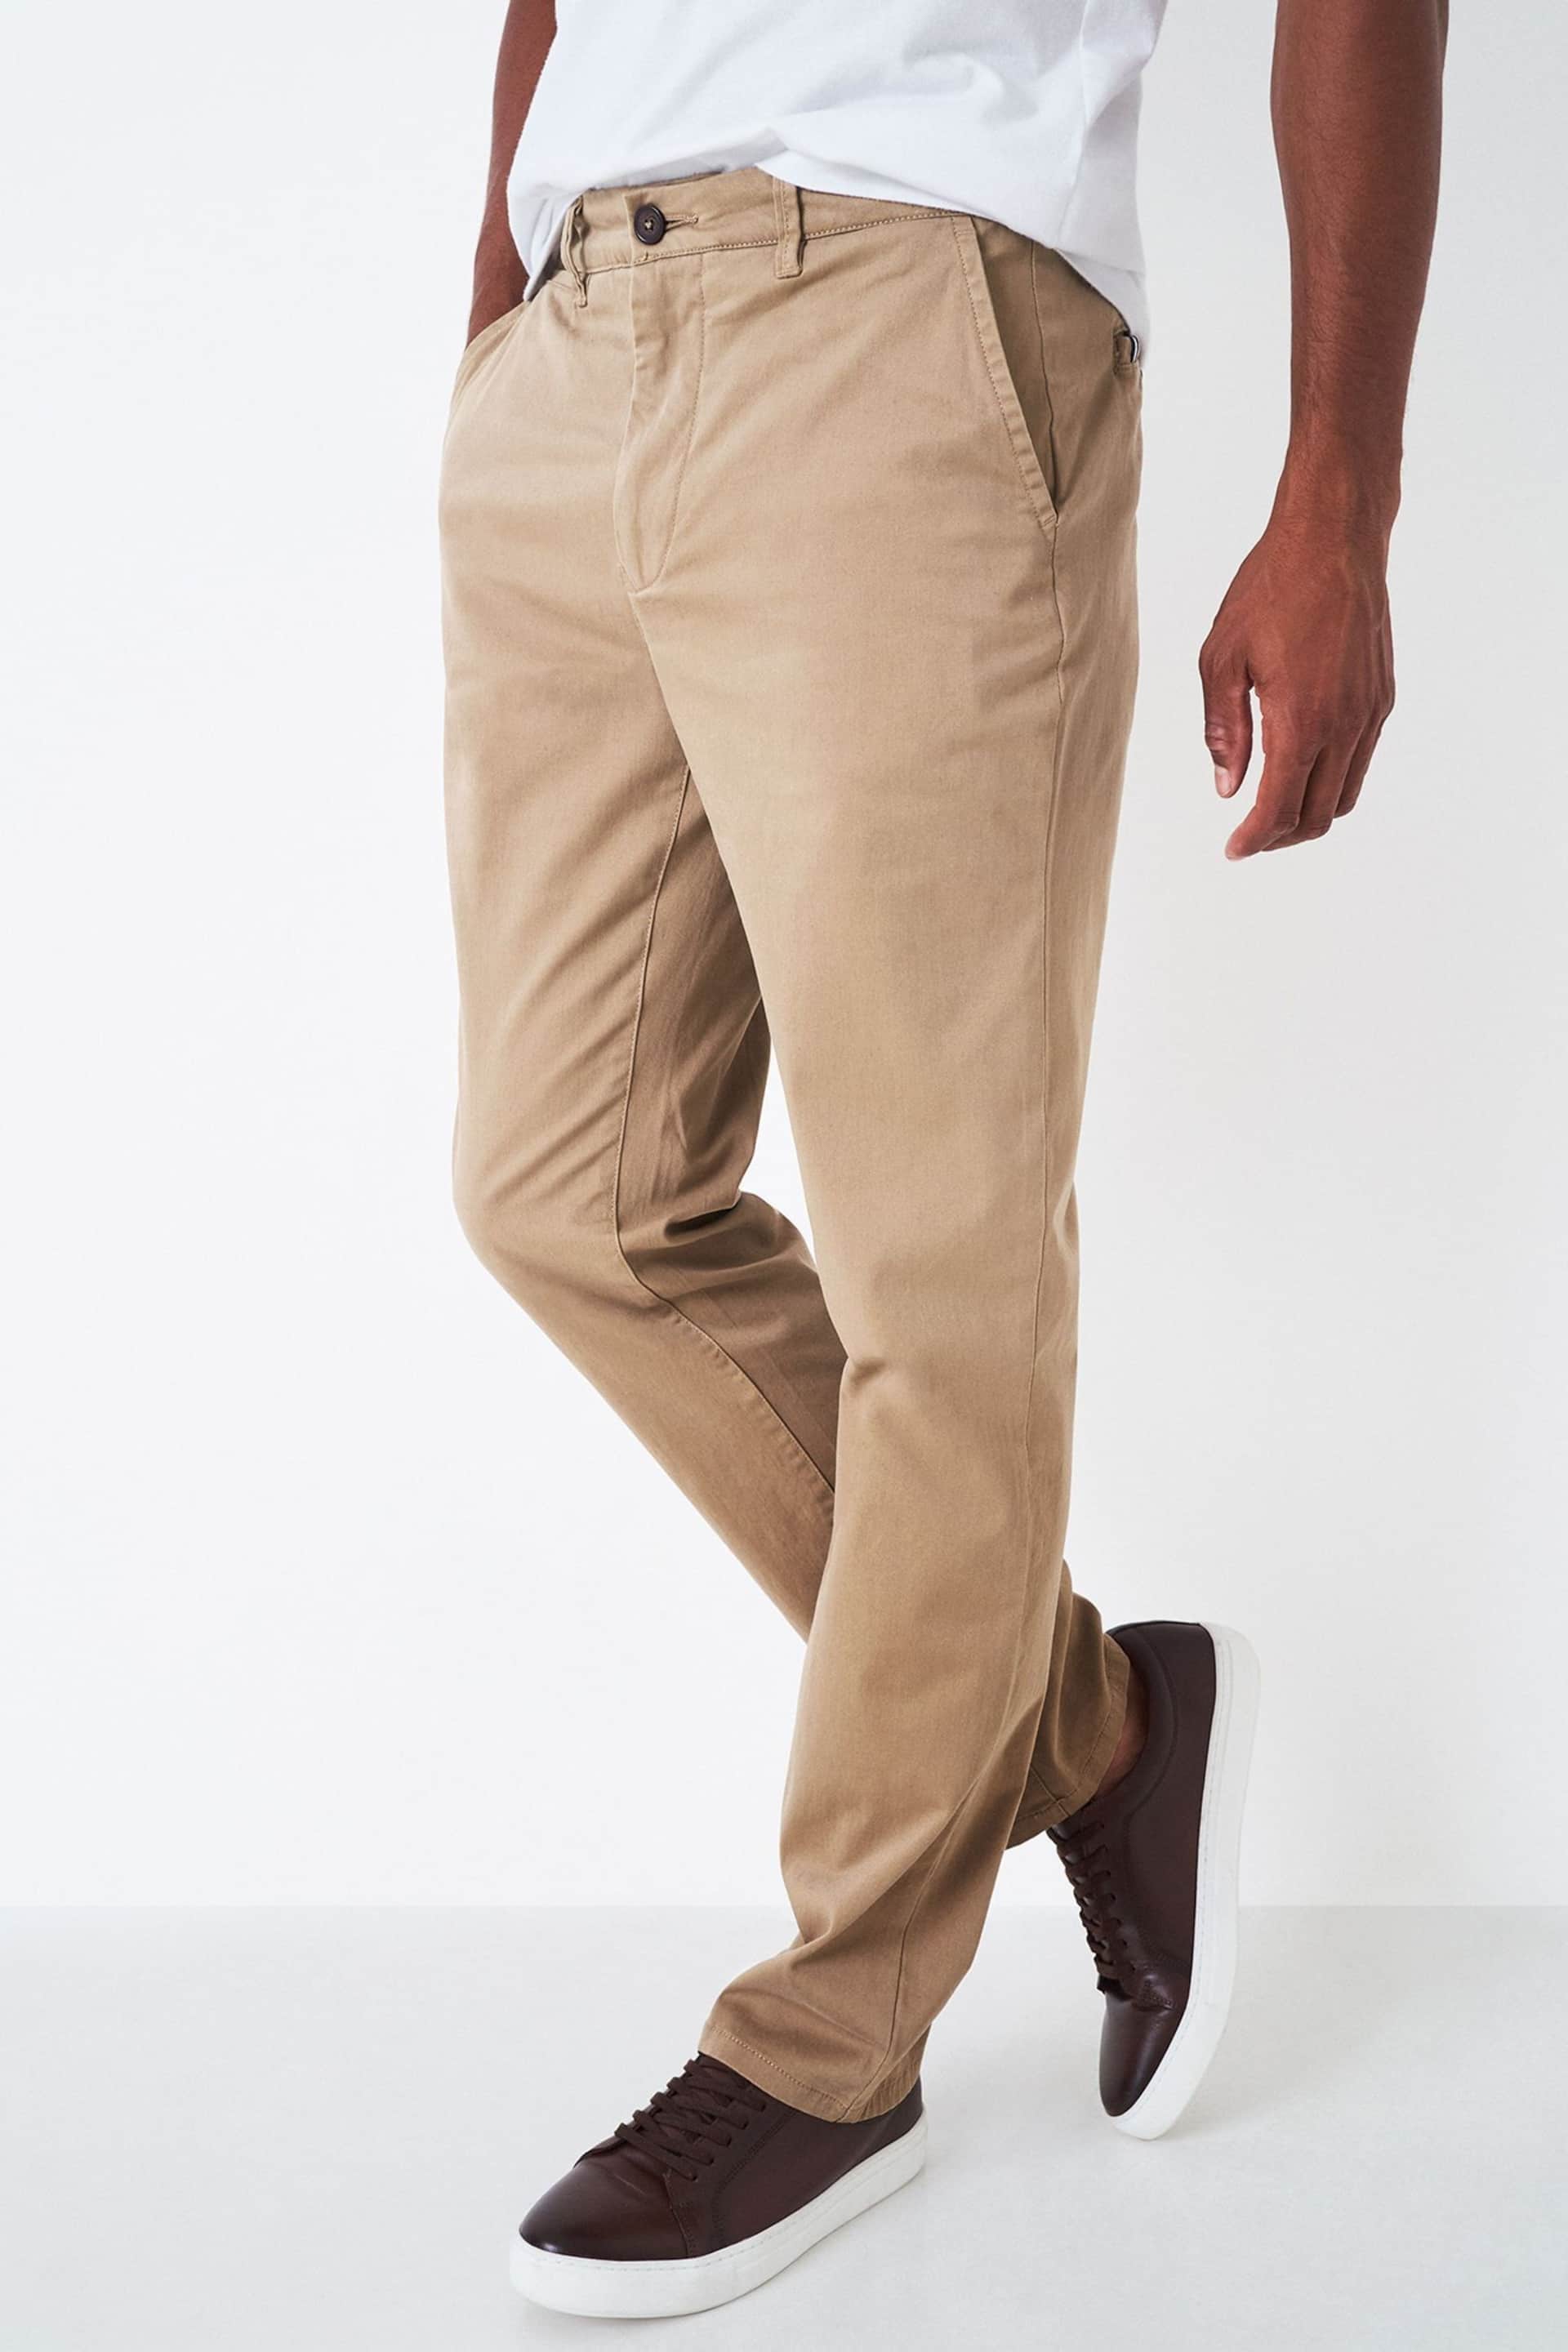 Buy Crew Clothing Company Cotton Straight Fit Chino Trousers - Image 1 of 4